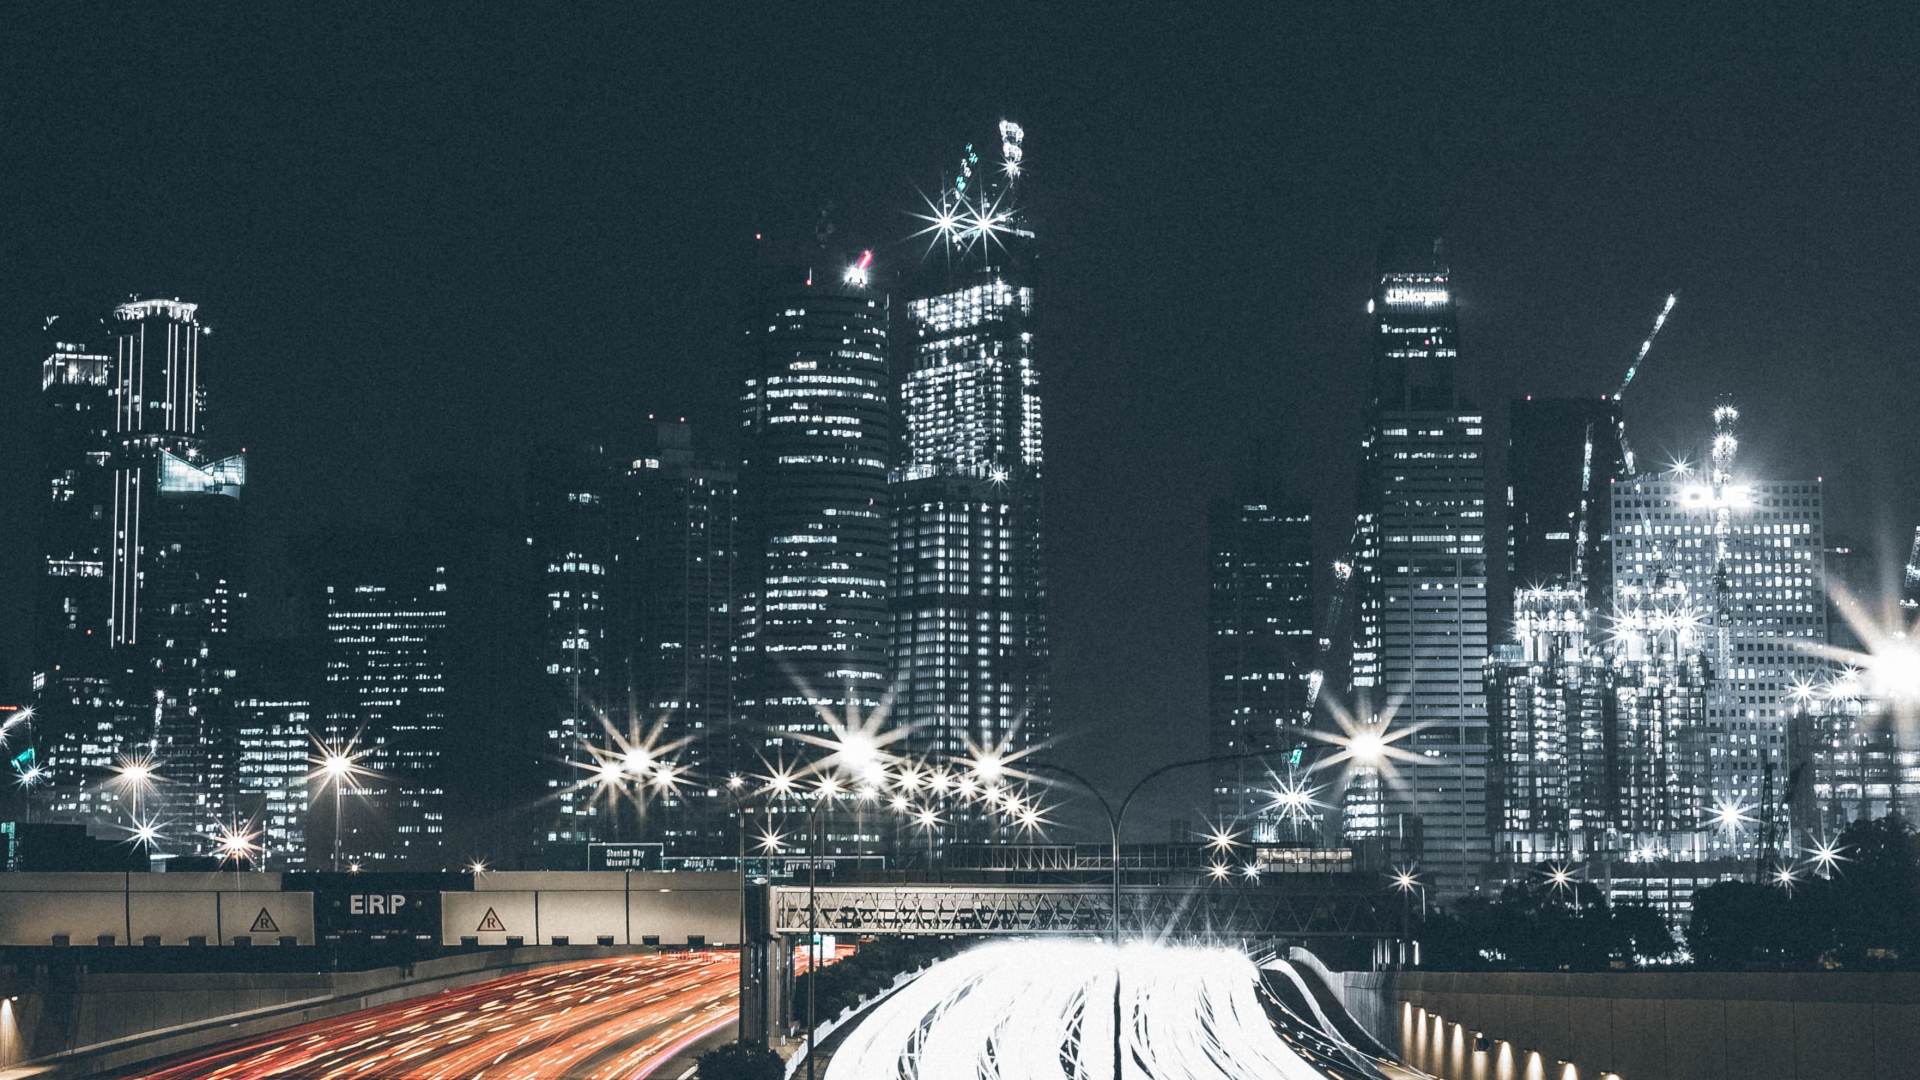 Skyline at night with lights and car headlights